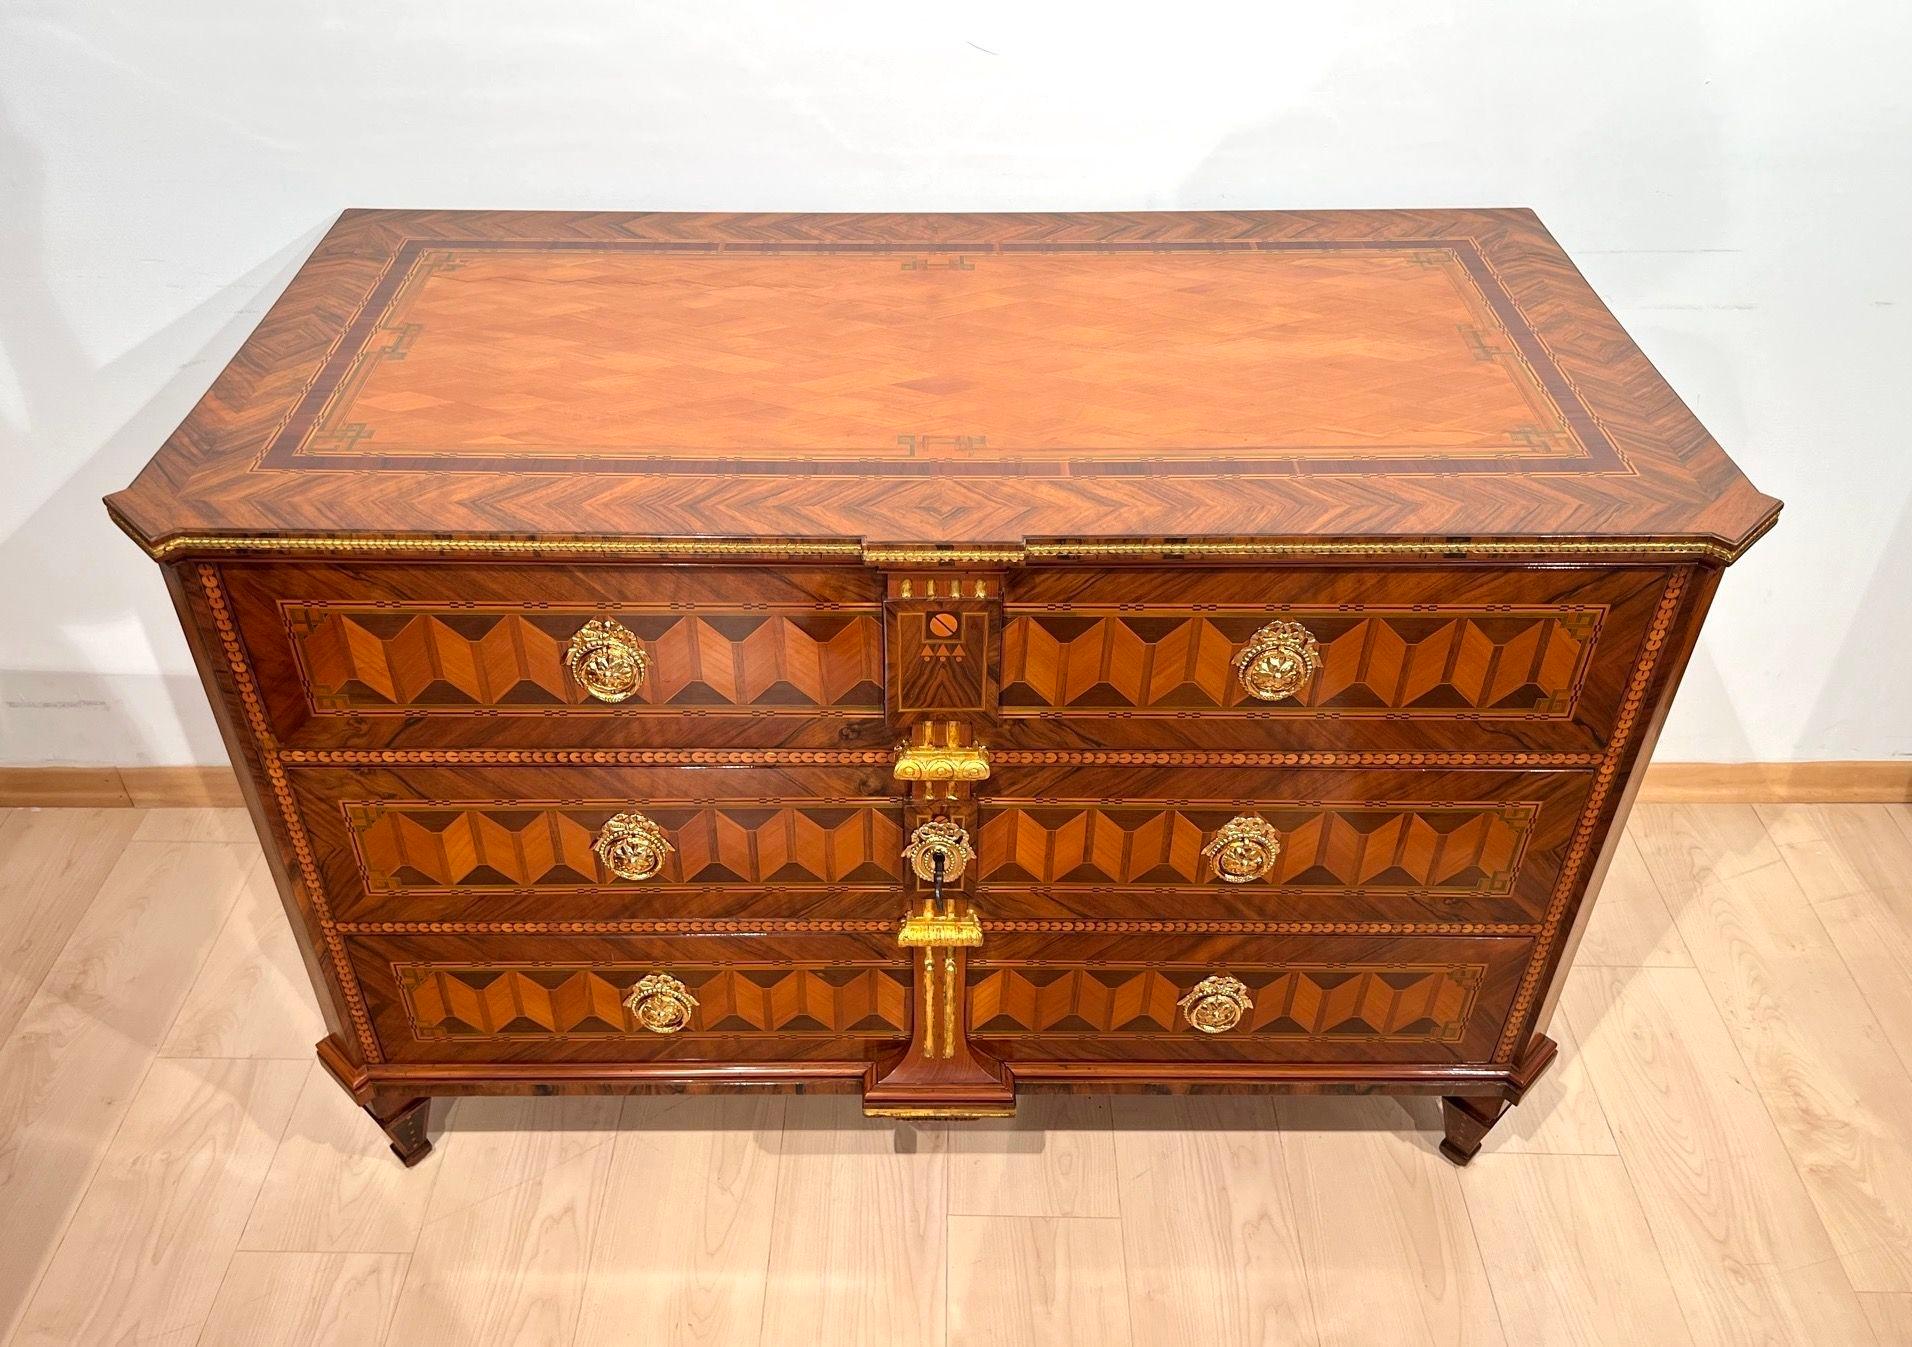 Elegant straight-lined neoclassical Austrian 'Josephine' or Louis XVI. period Commode or Chest of Three Drawers from Vienna, Austria from the late 18th Century about 1790.
Walnut and cherry veneer on softwood with inlays in plum, maple, ebony and